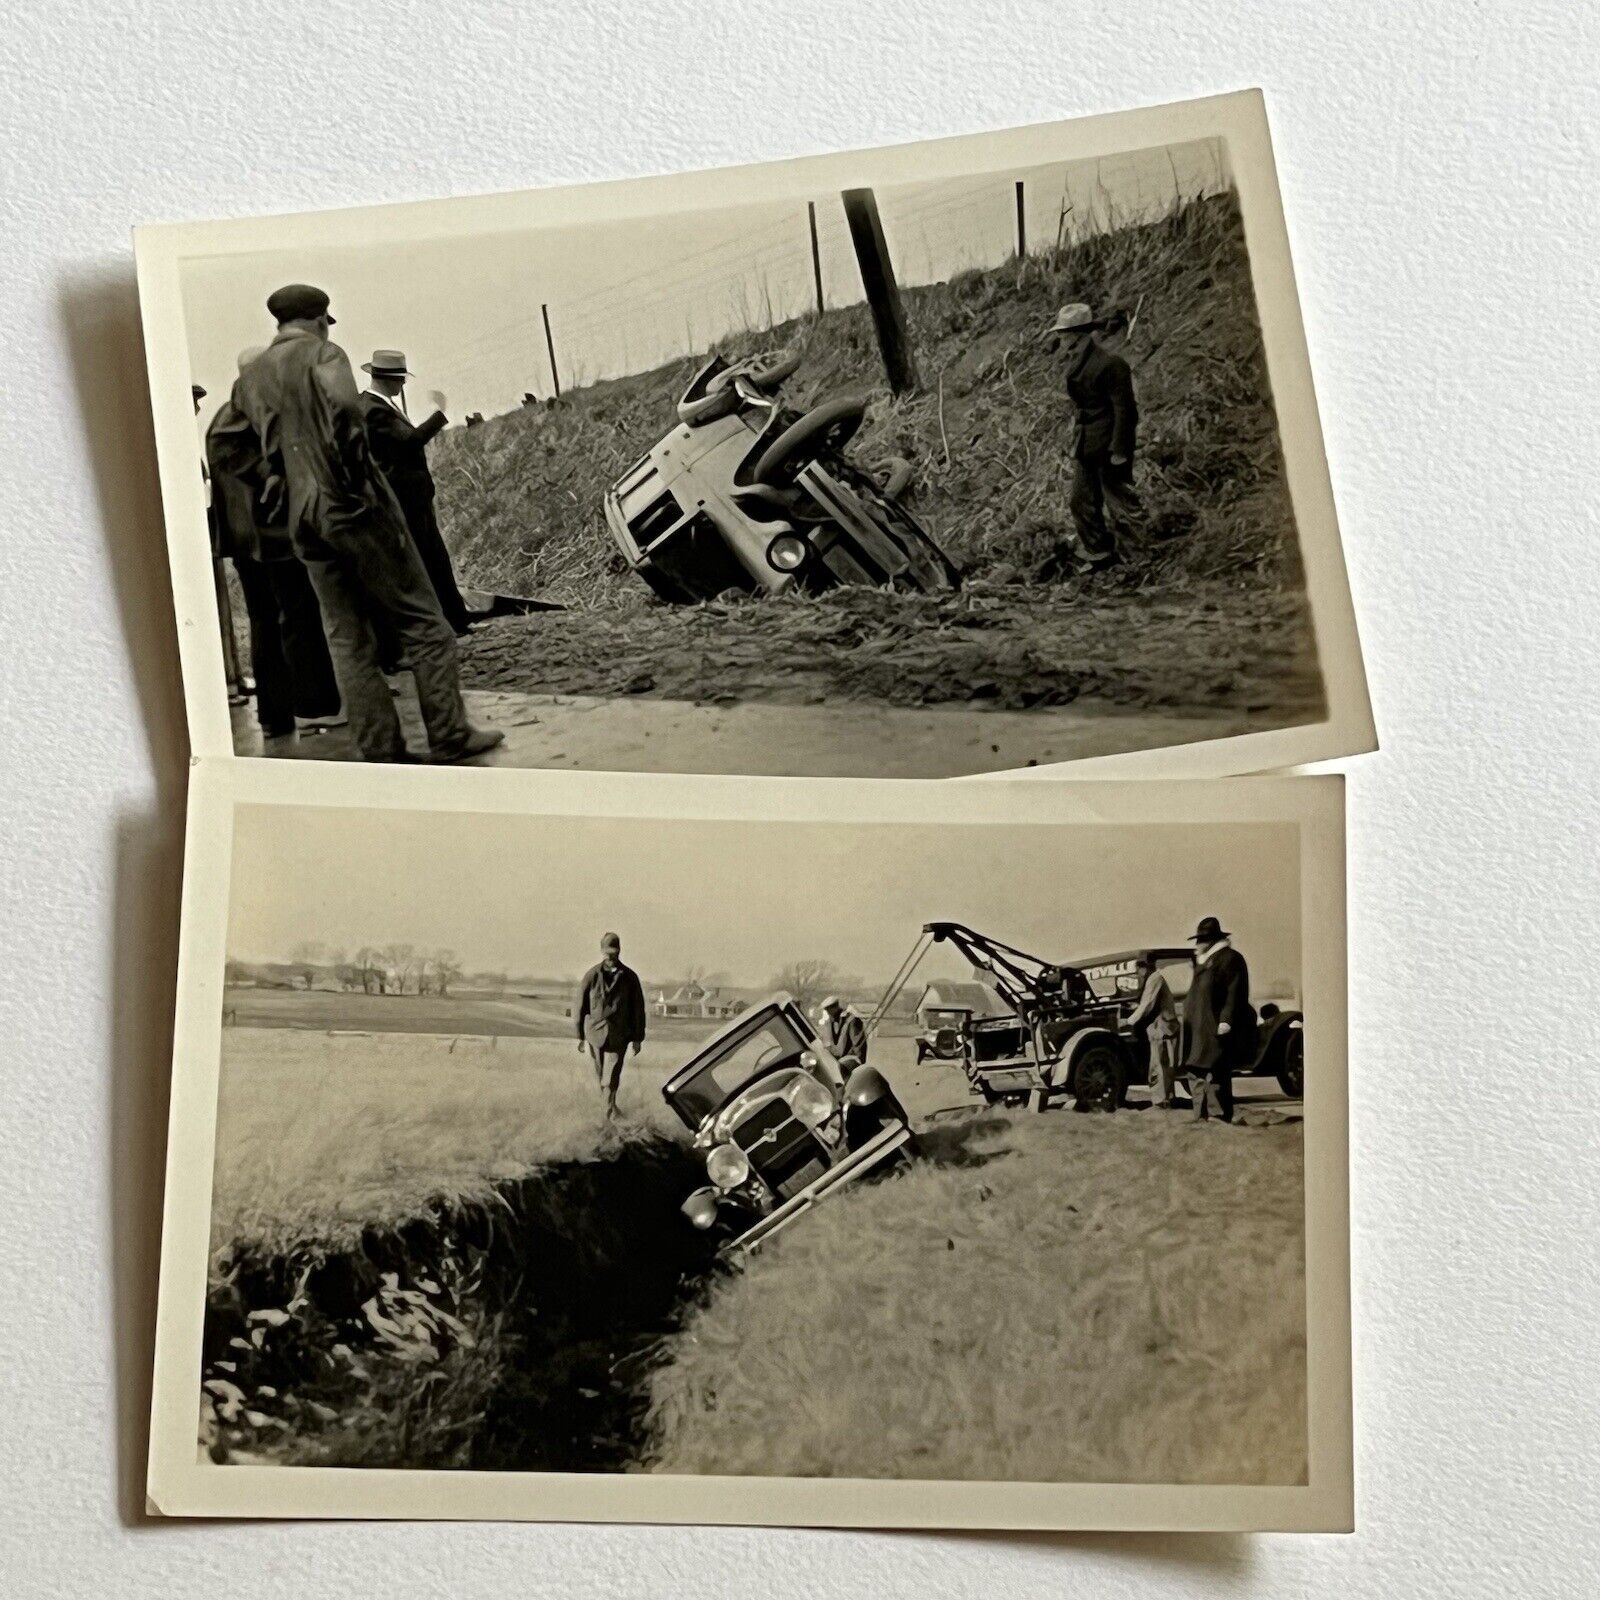 Vintage B&W Snapshot Photograph Studebaker Car Overturned Wrecked Tow Truck Set